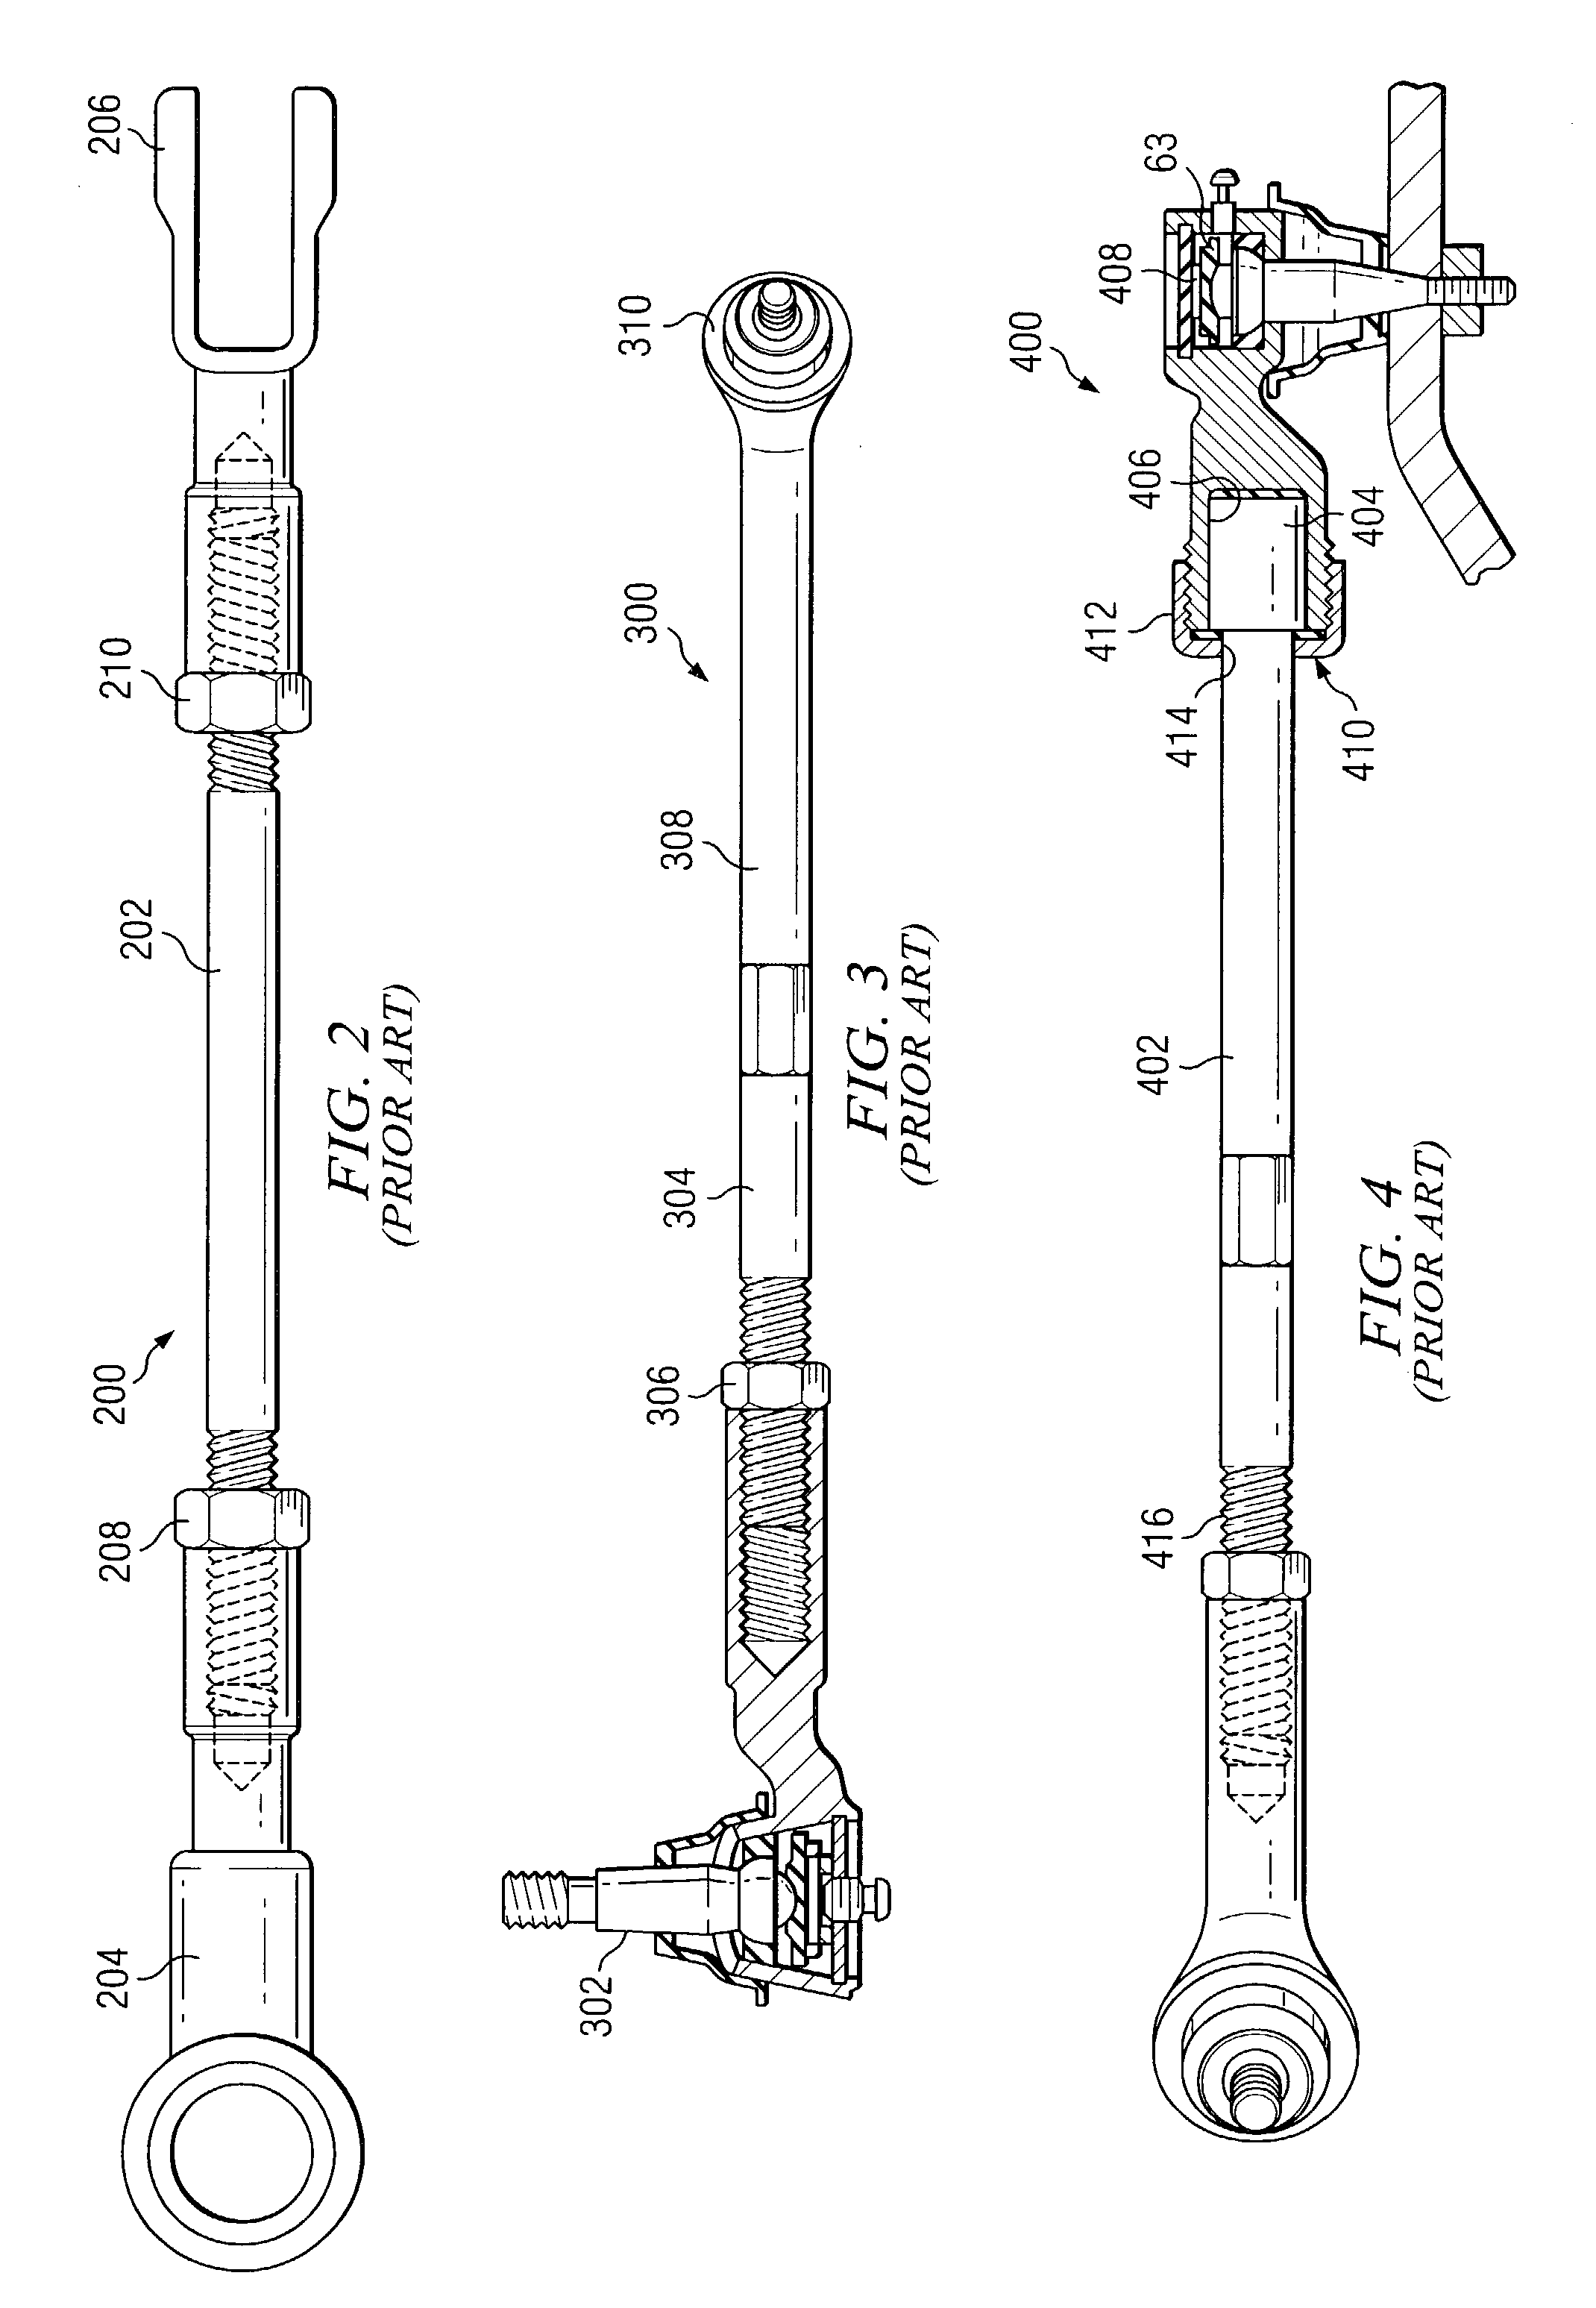 Turnbuckle linkage assembly